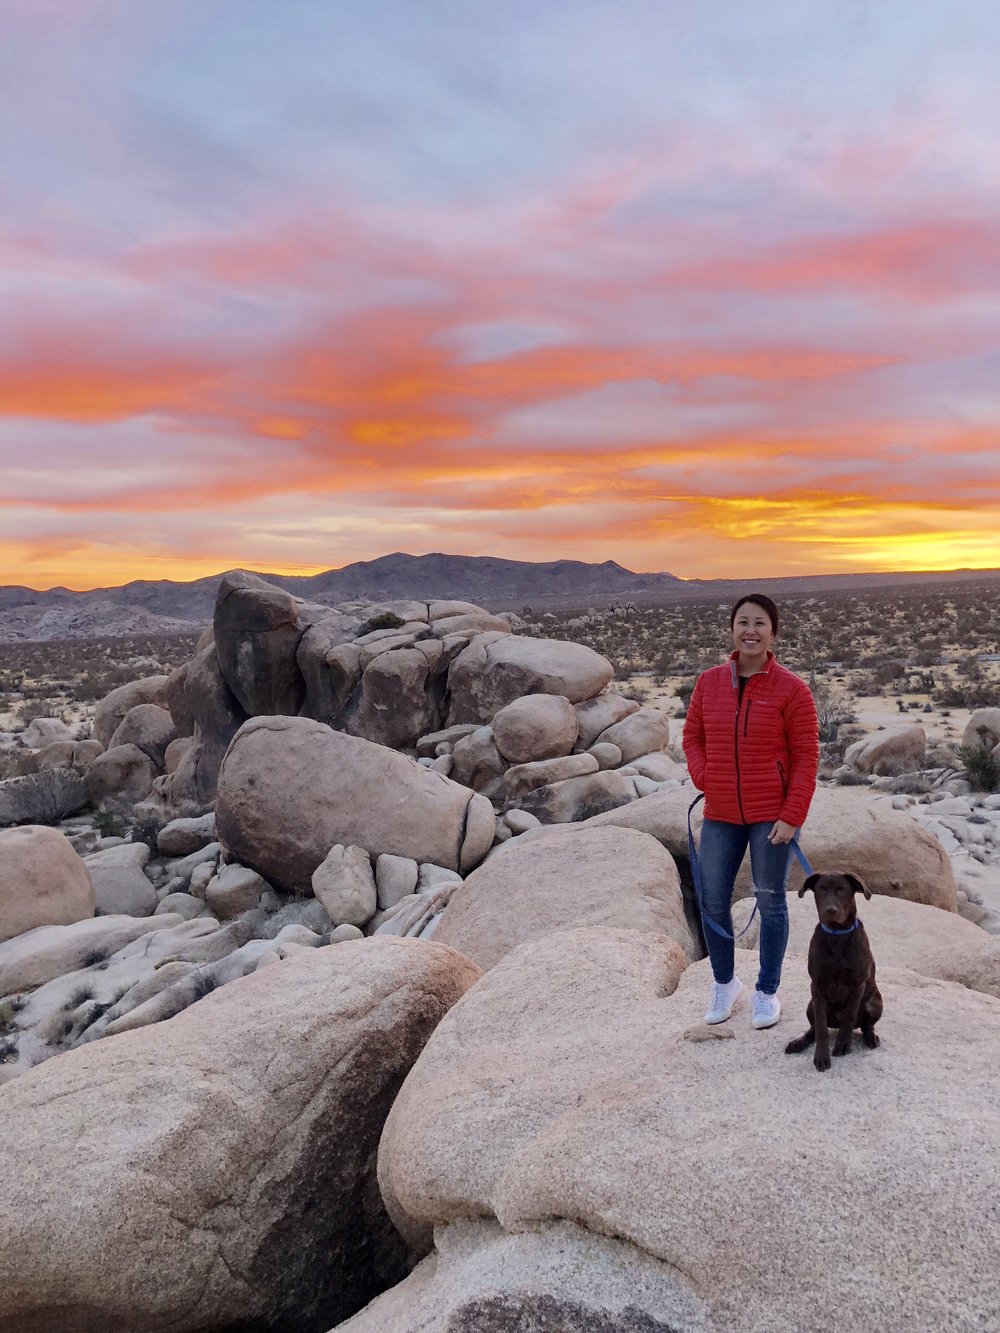 are dogs allowed in joshua tree